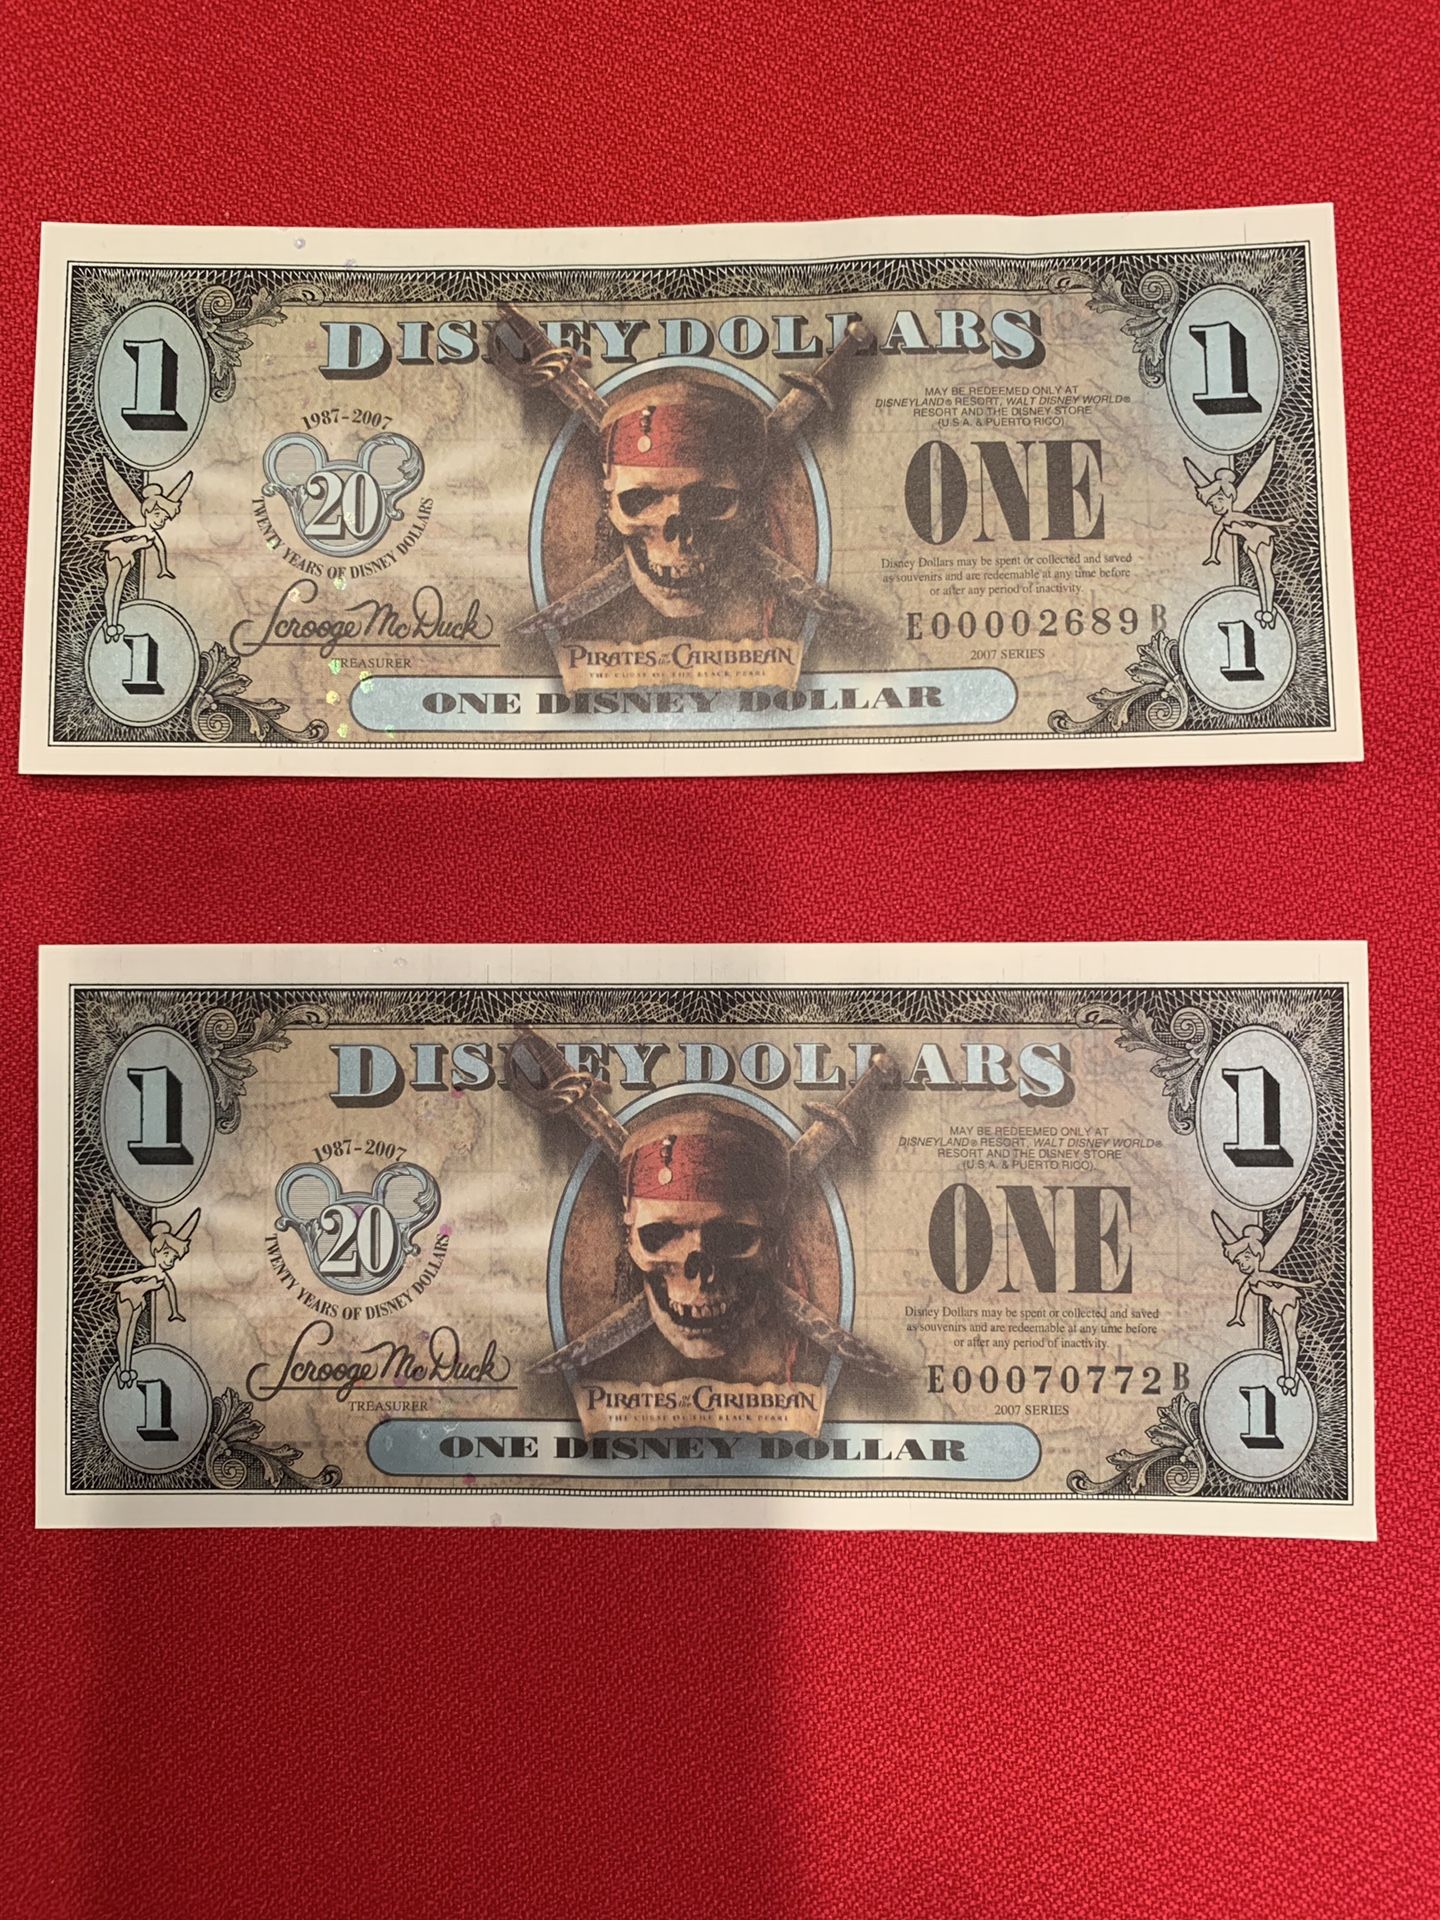 2007 Disney Dollars Pirates of the Caribbean “Black Pearl” Low E number-uncirculated.